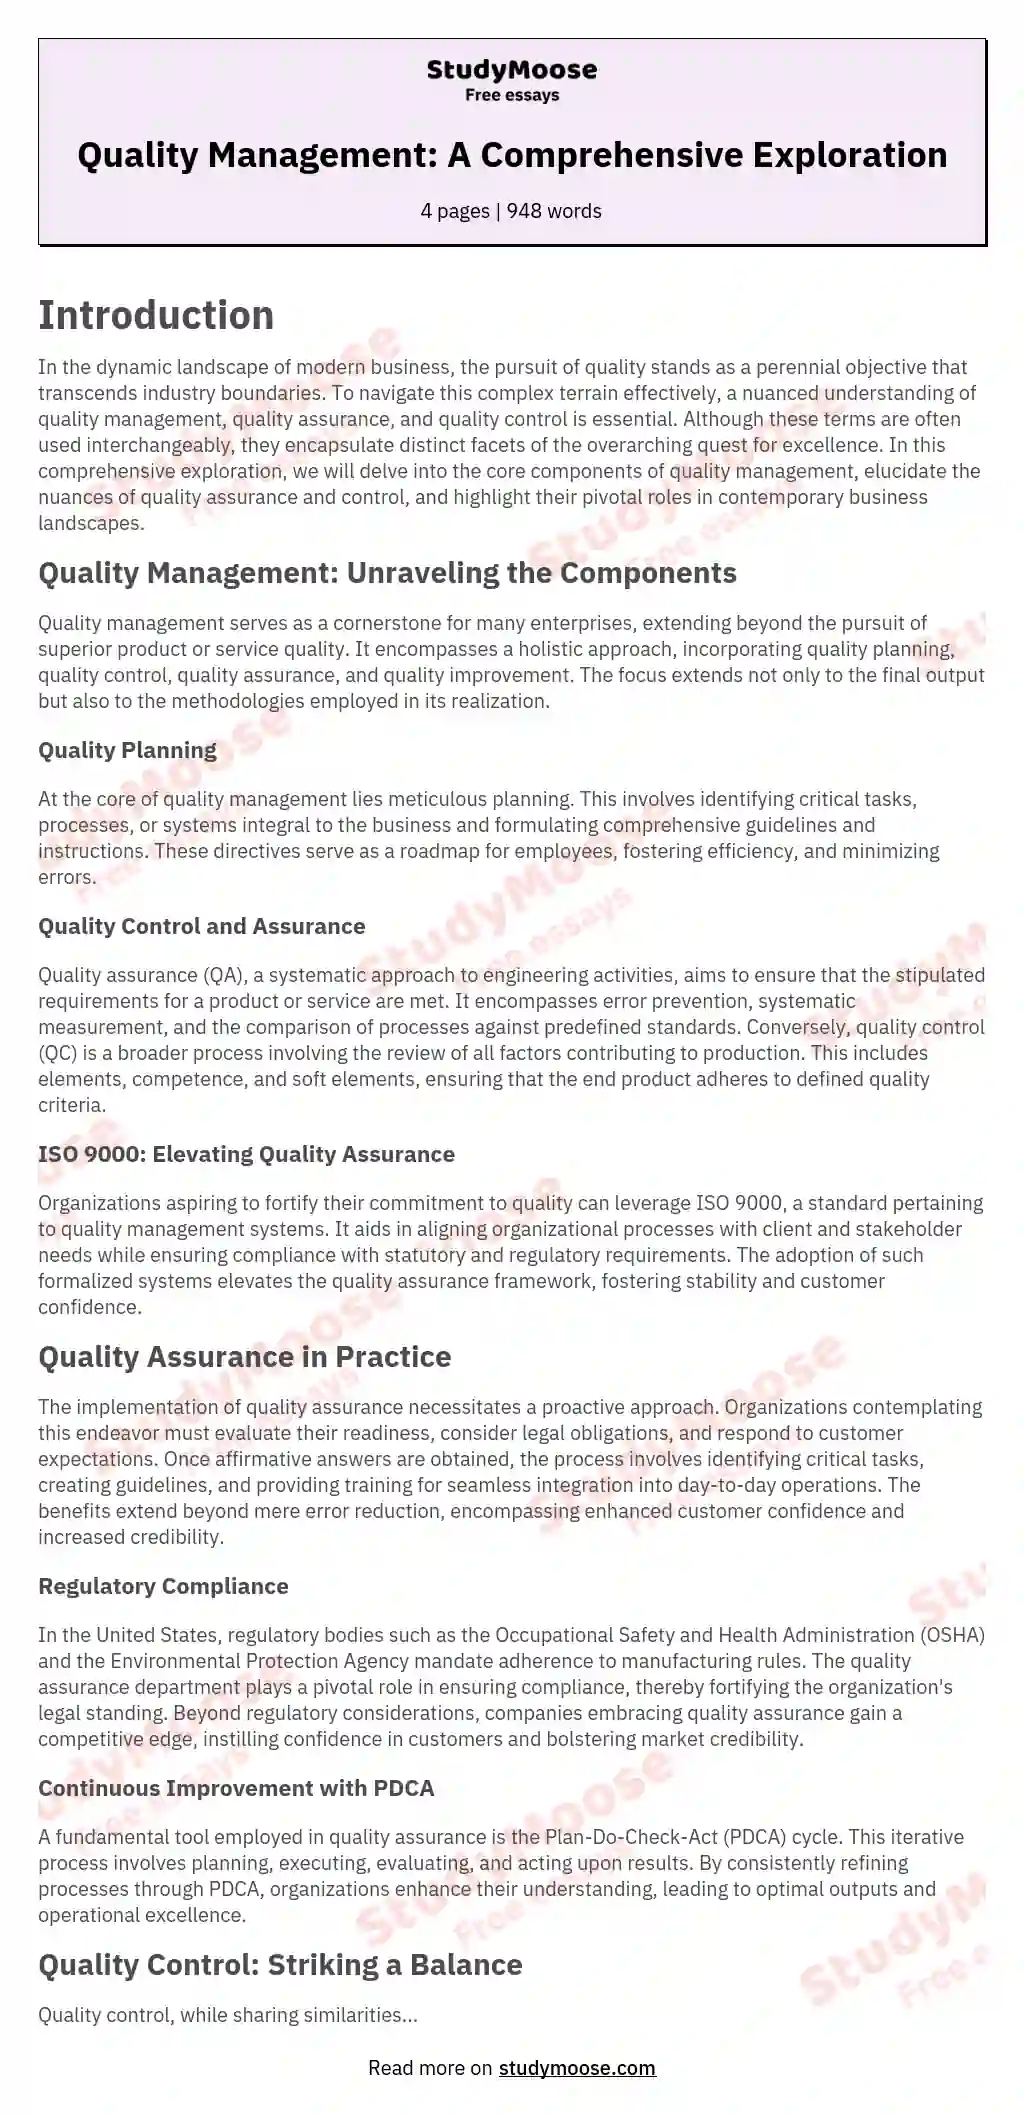 essay about total quality management